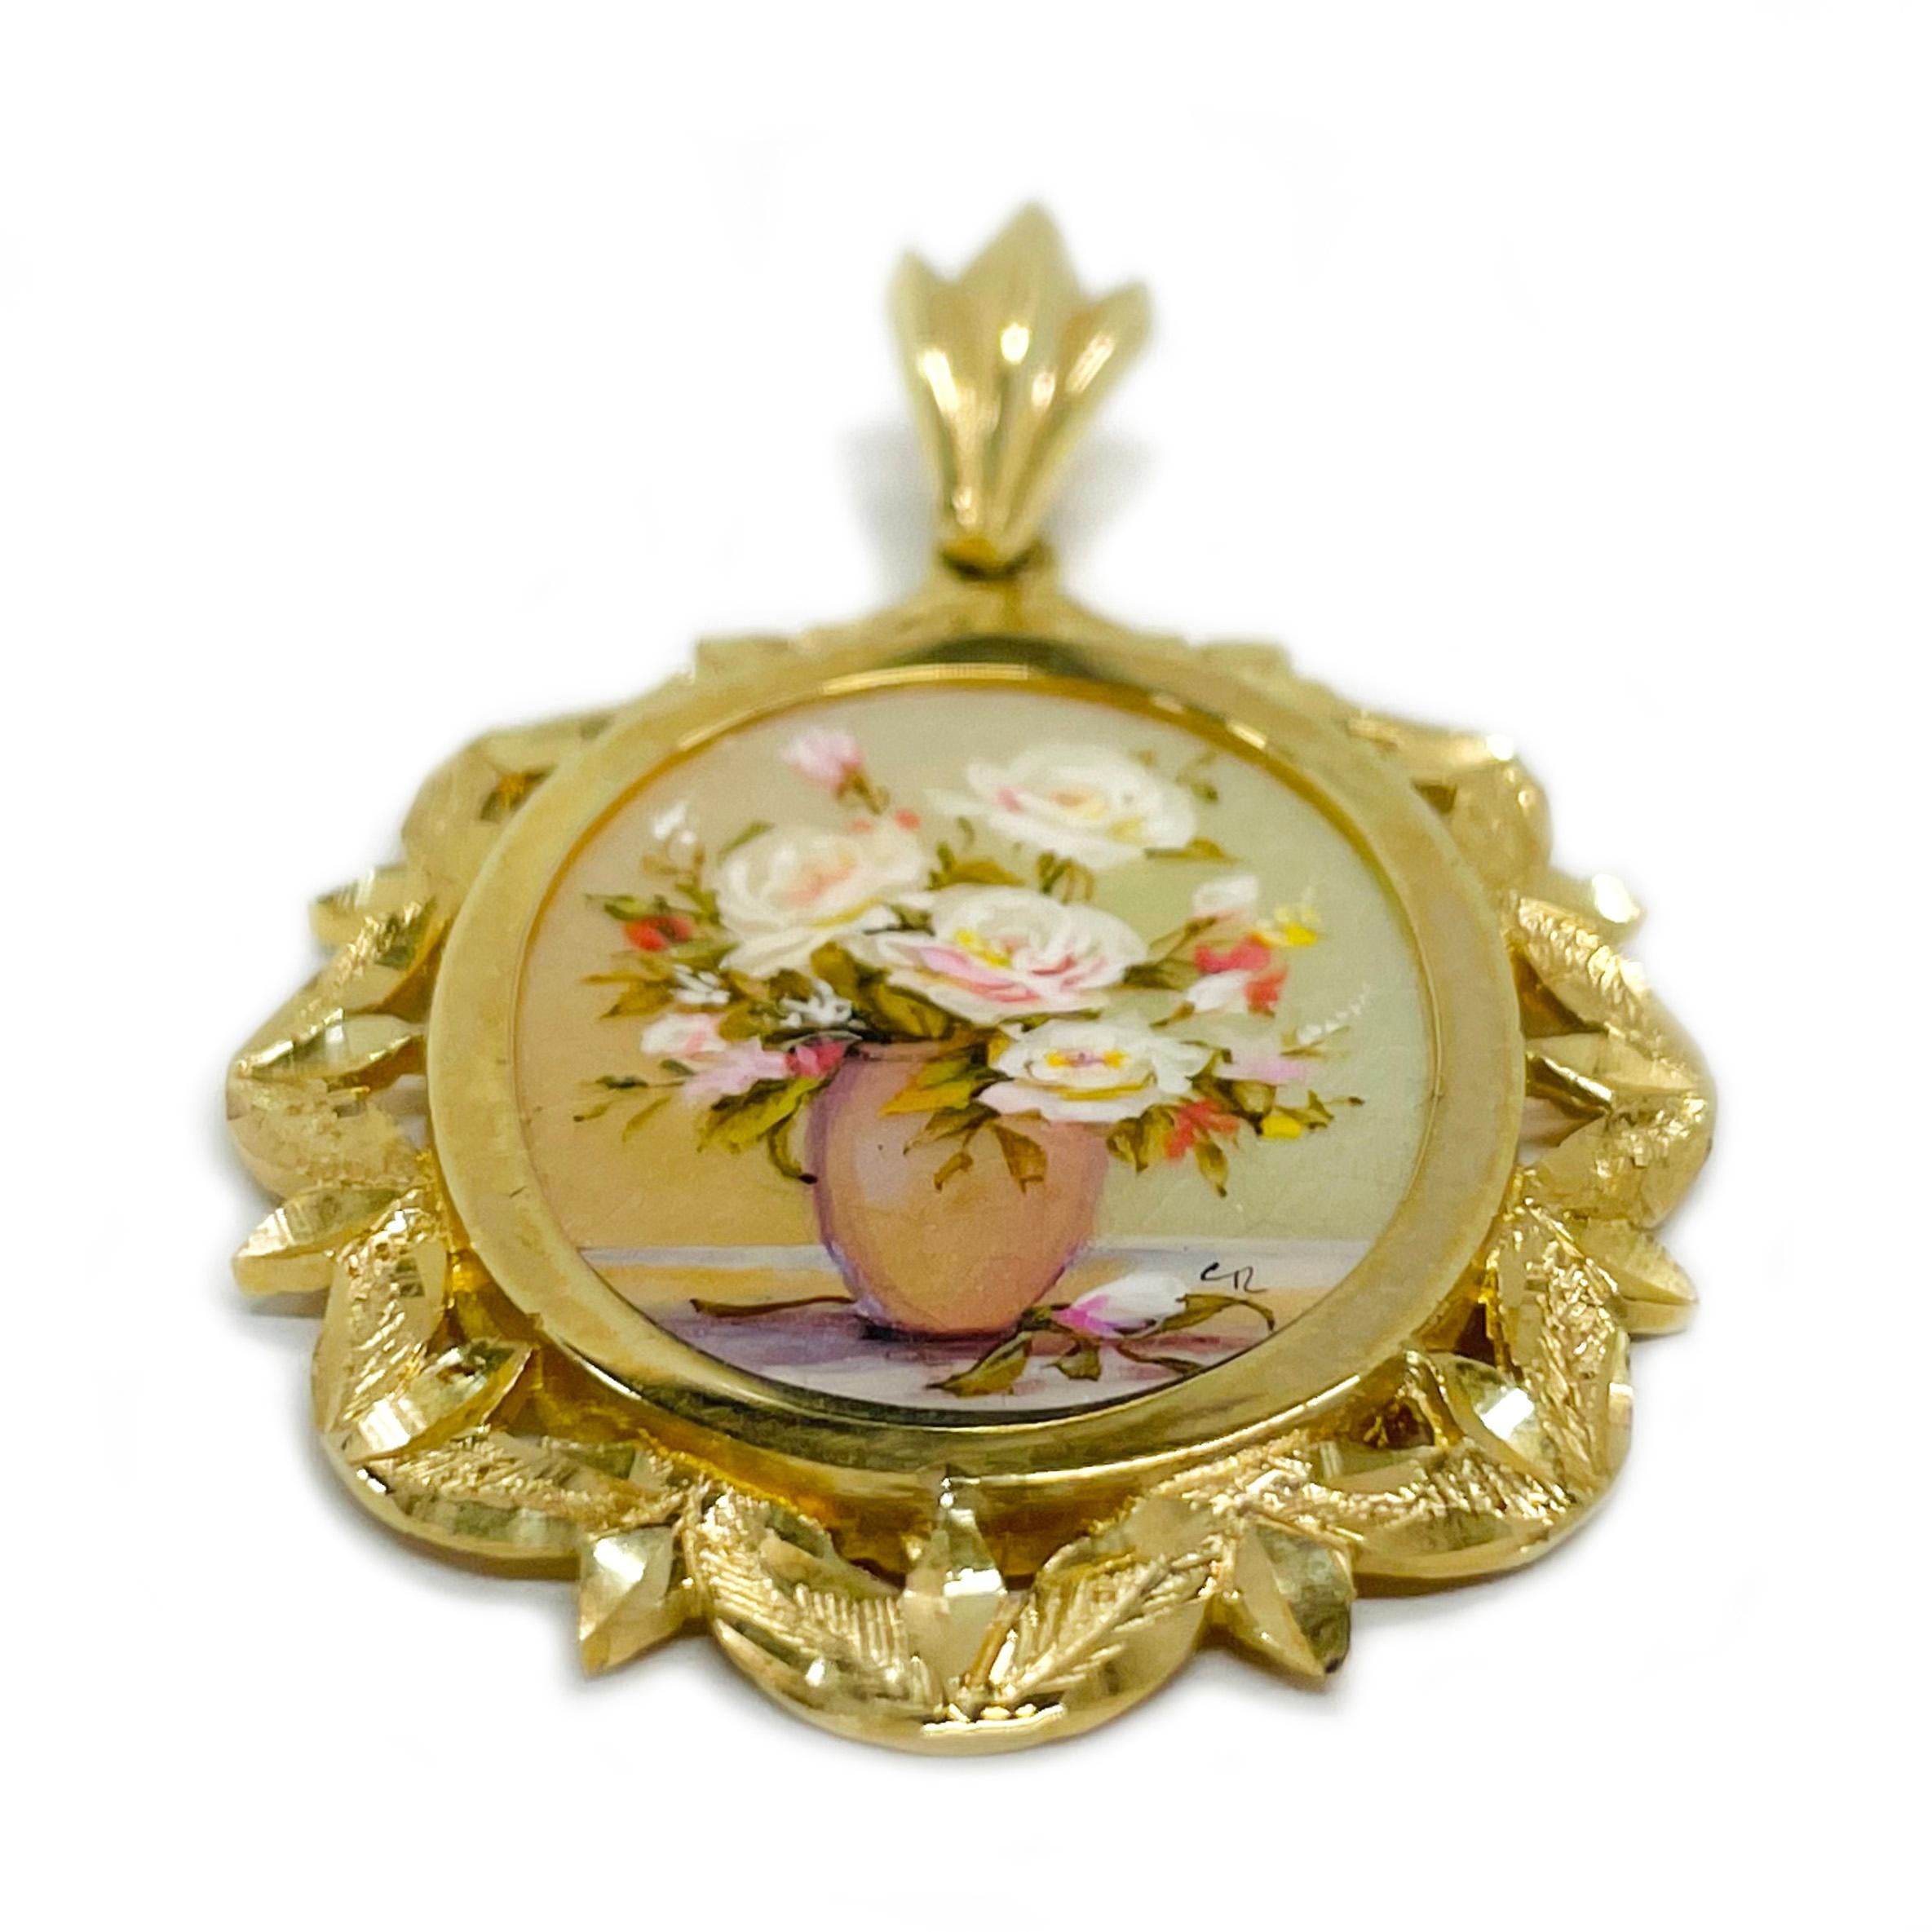 14 Karat Yellow Gold Rose Planter Hand Painted on a Mother of Pearl Pendant. The miniature painting is set in a 14 karat gold twisted rope oval frame with diamond-cut details. The painting is signed by the master artist, CR Charlotte. and includes a